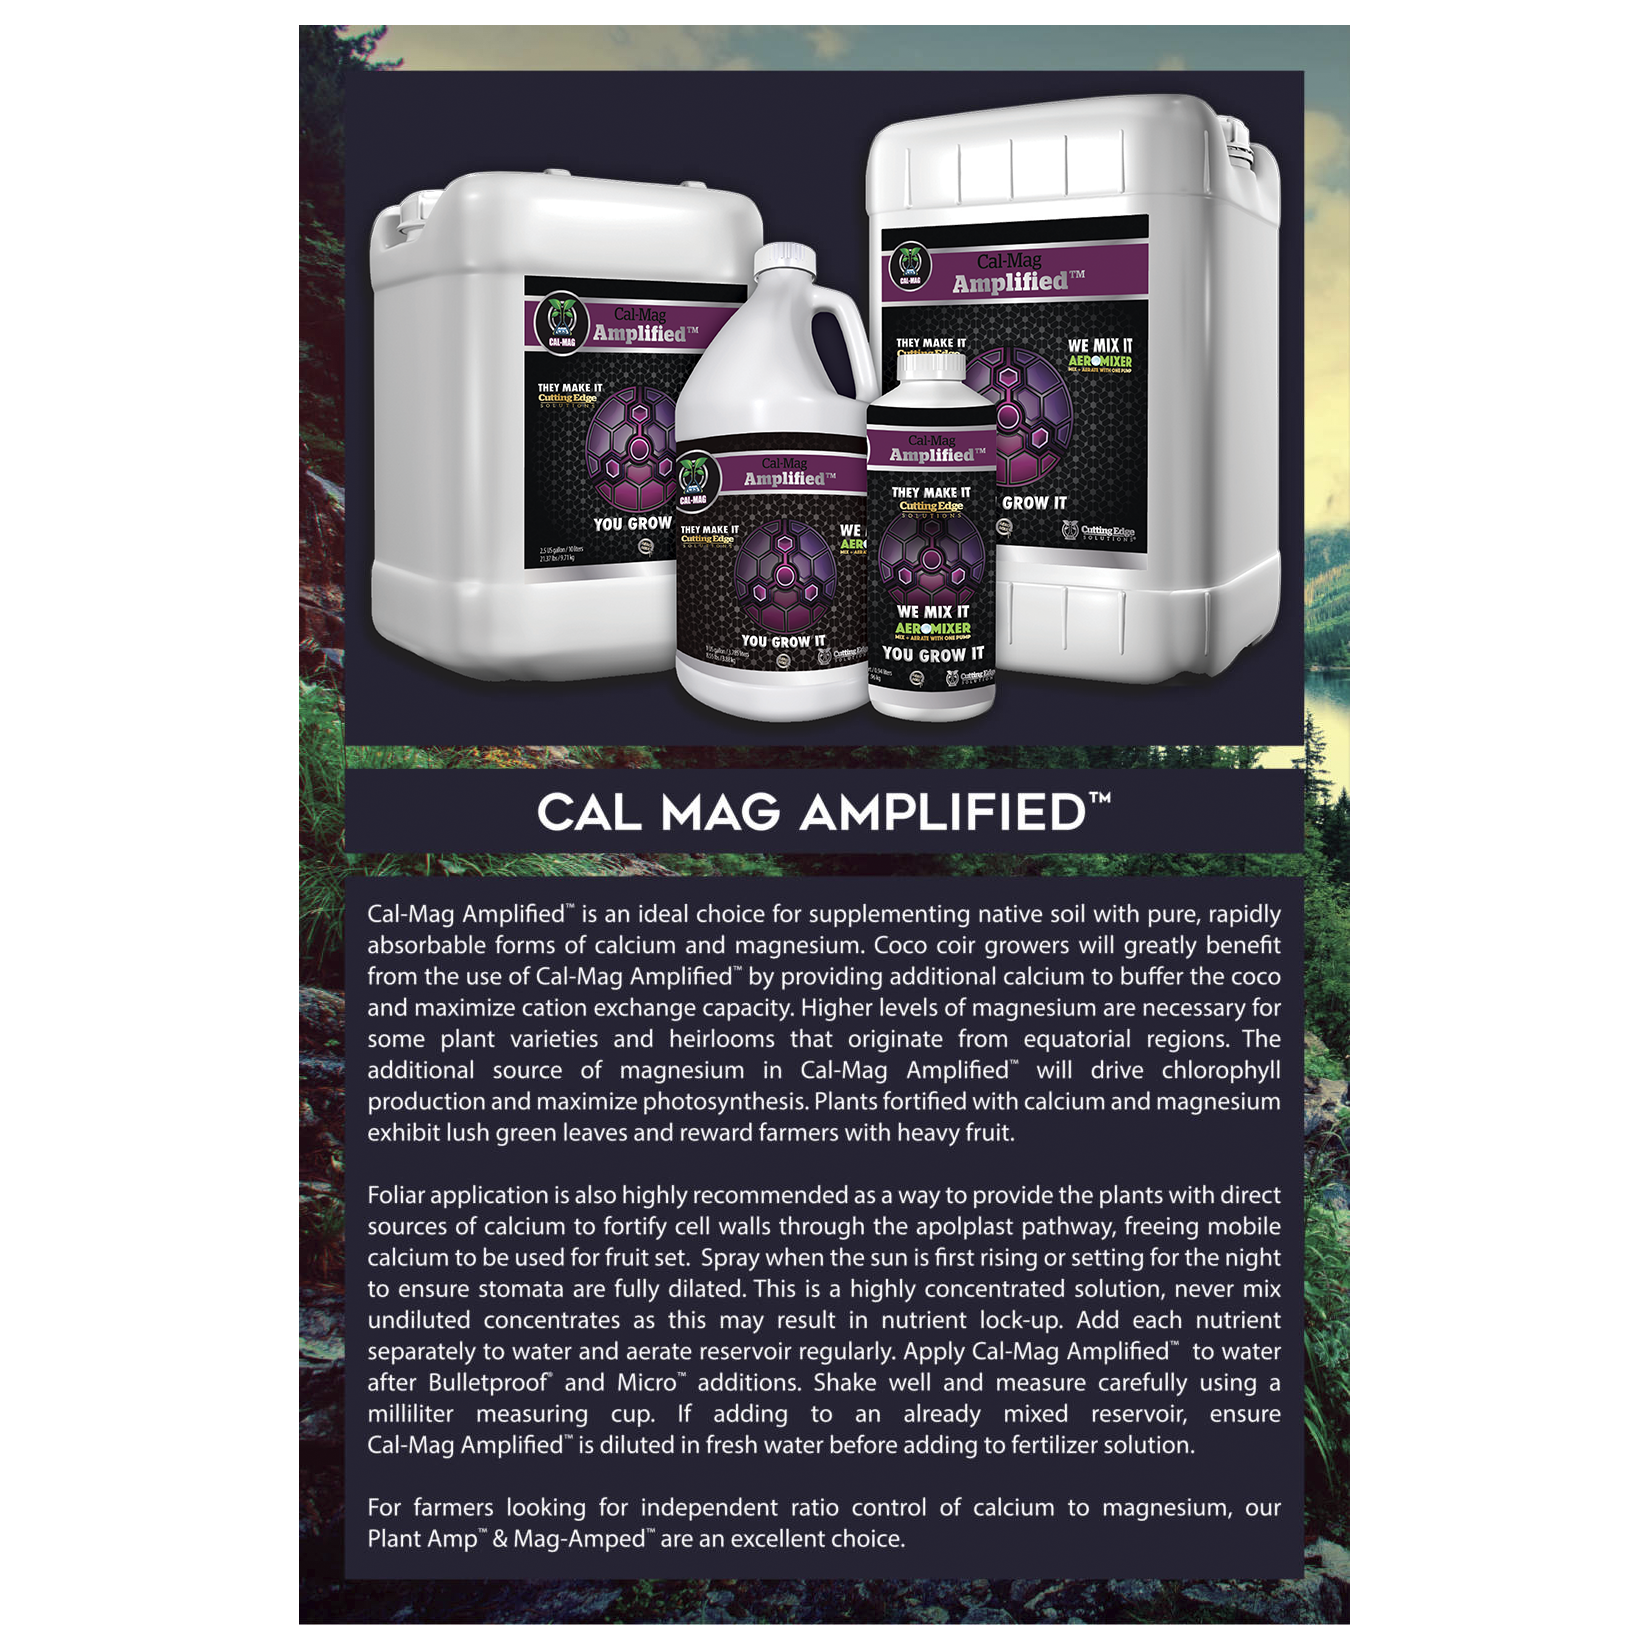 Cal-Mag Amplified